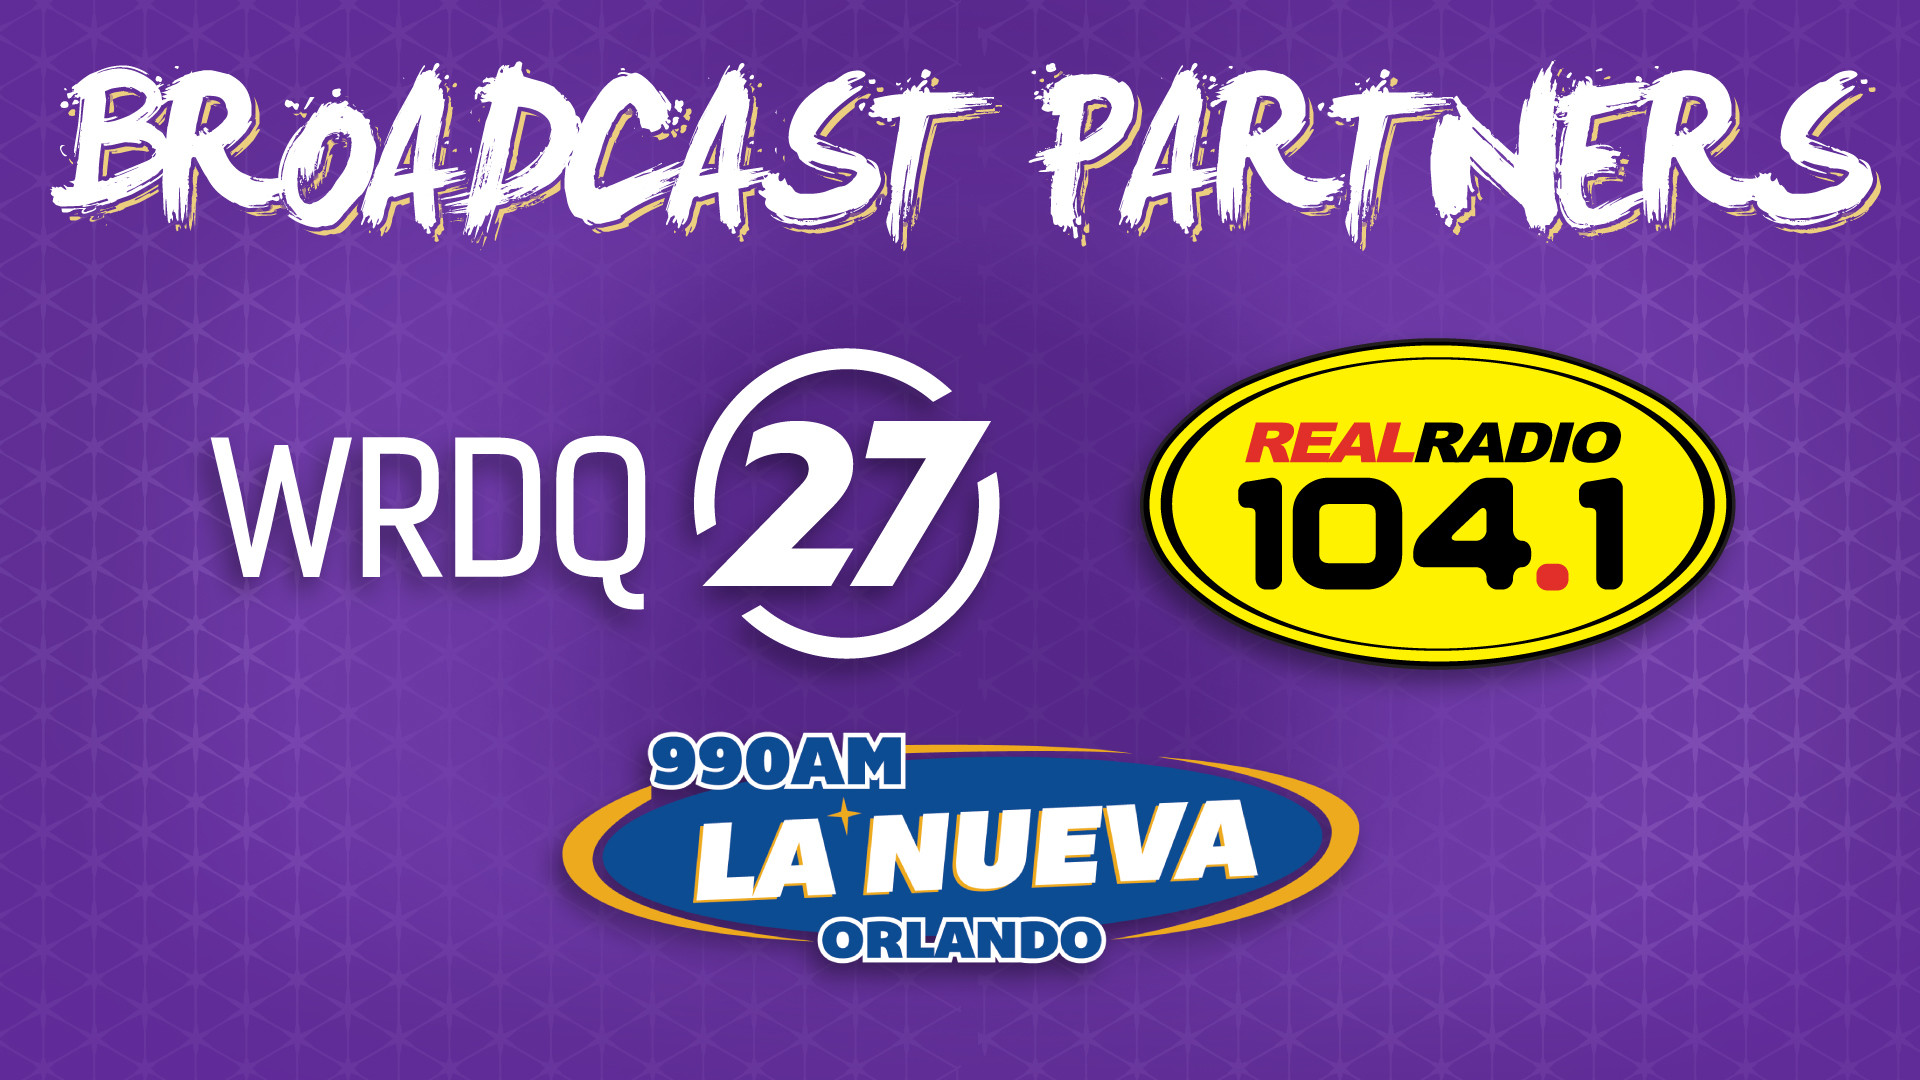 1920x1080 Orlando City fans can tune in to all locally broadcast City matches on WRDQ  TV 27. Listen to radio broadcasts on Real Radio 104.1 FM and Spanish  language ...